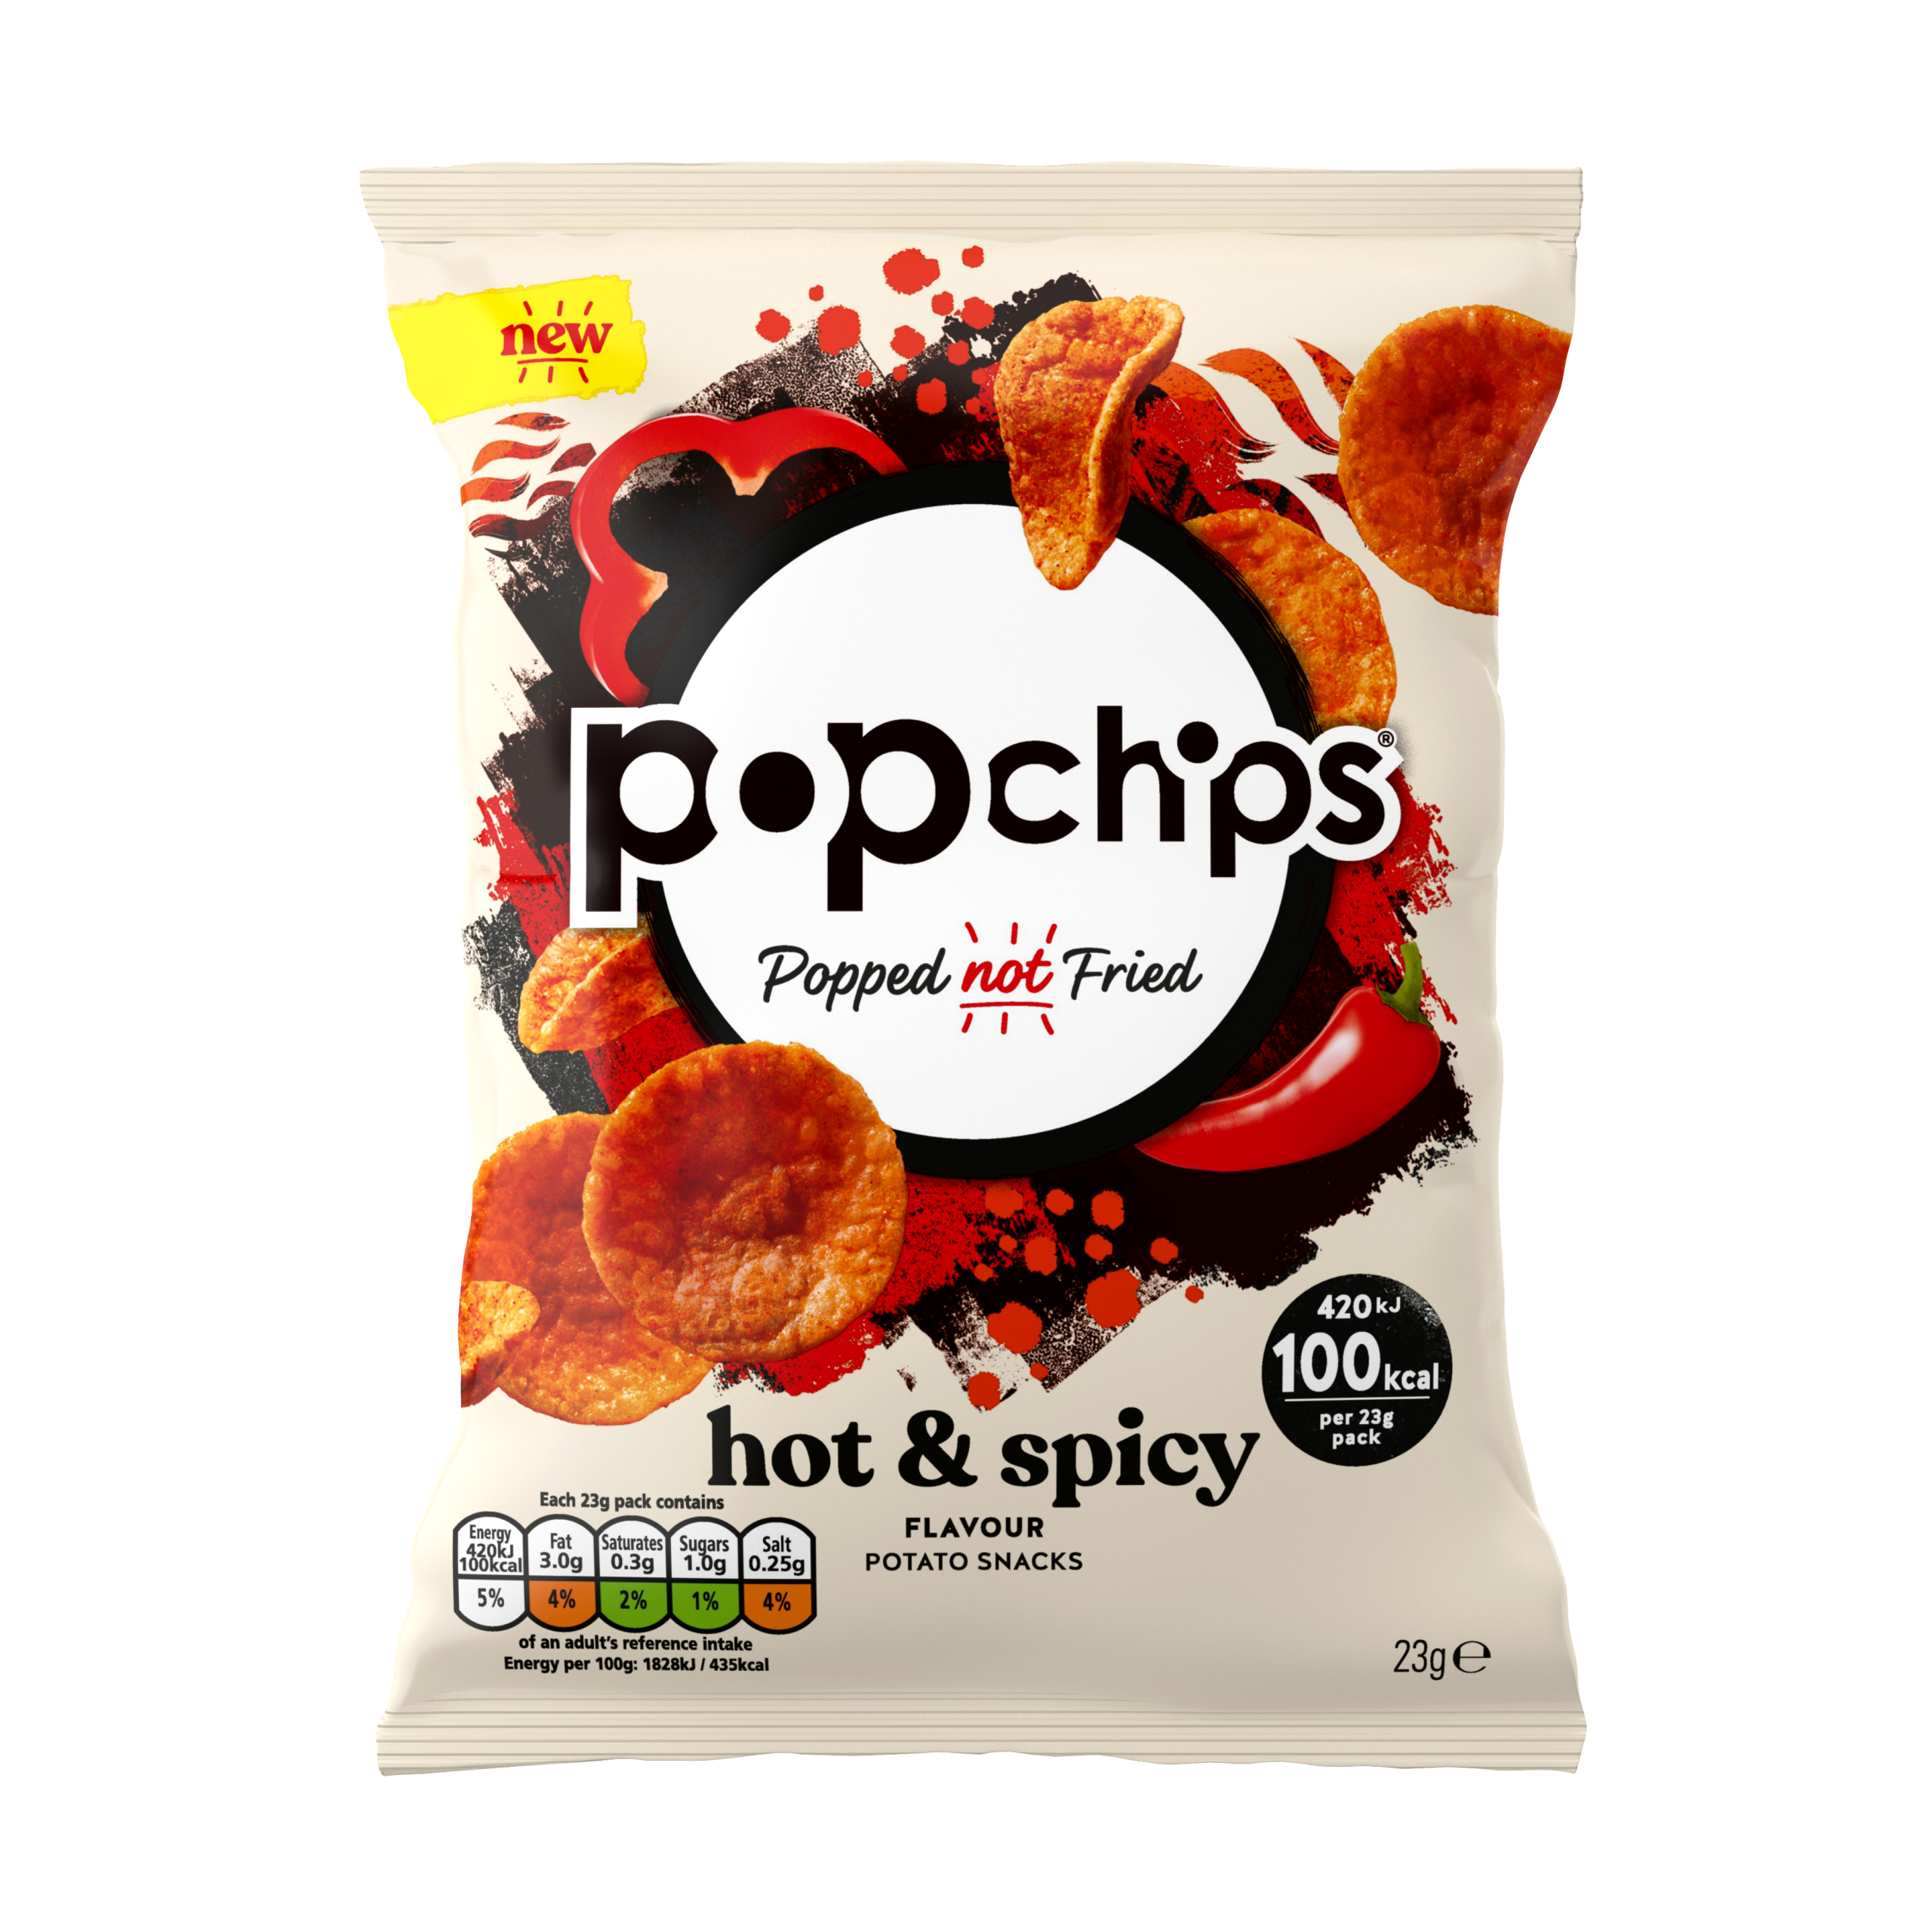 KP Snacks fires up healthy snacking with the launch of popchips Hot & Spicy